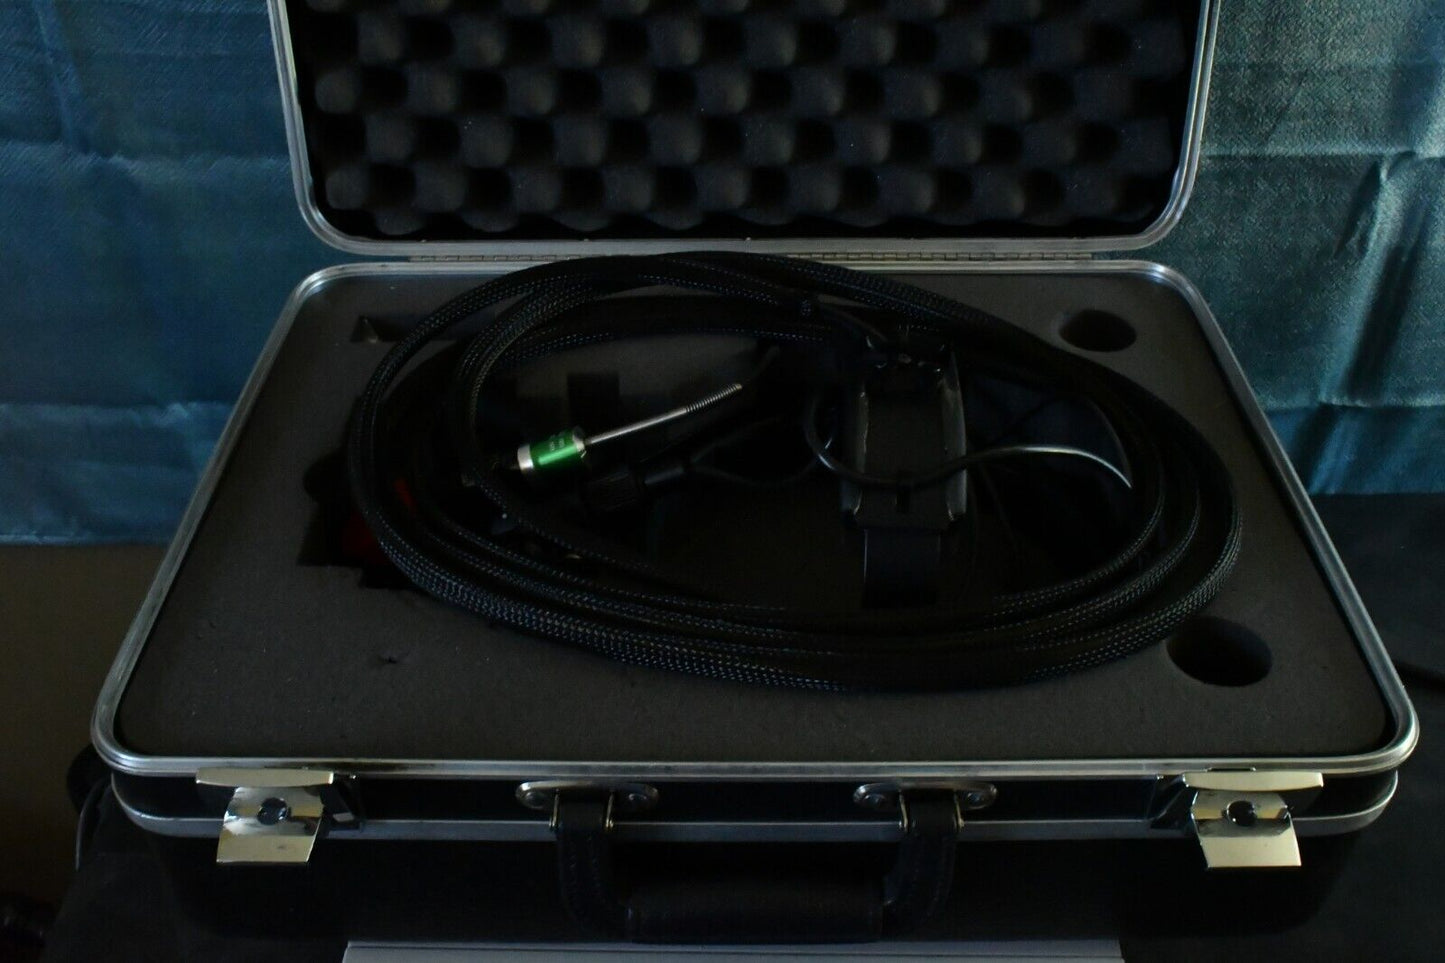 Iridex GLx with LIO Plus Laser indirect ophthalmoscope and case